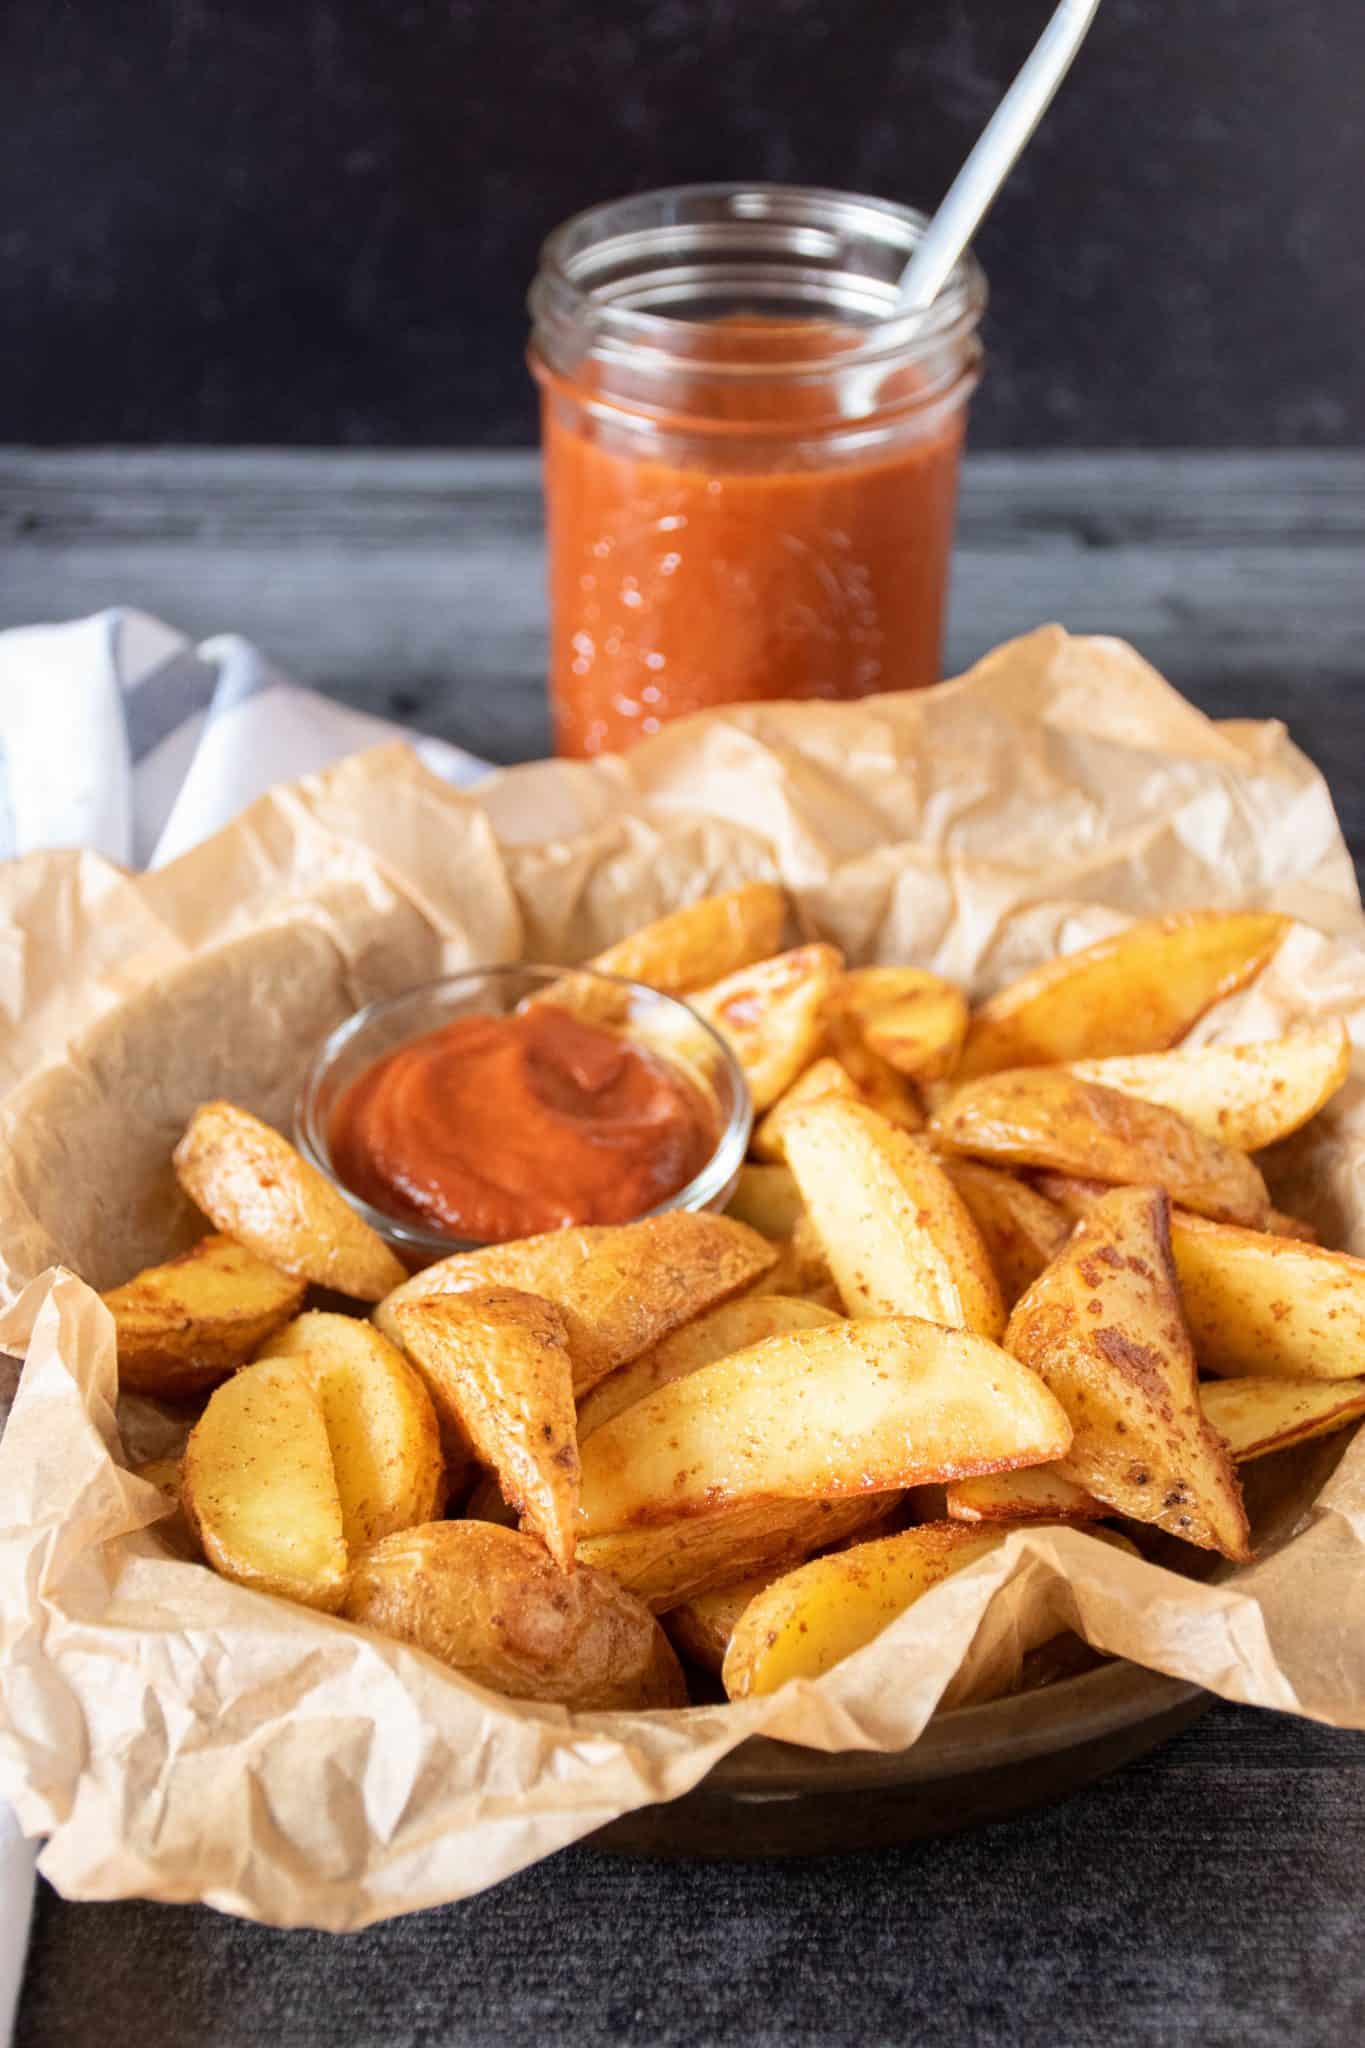 Basket of potato wedges with a small bowl of ketchup.